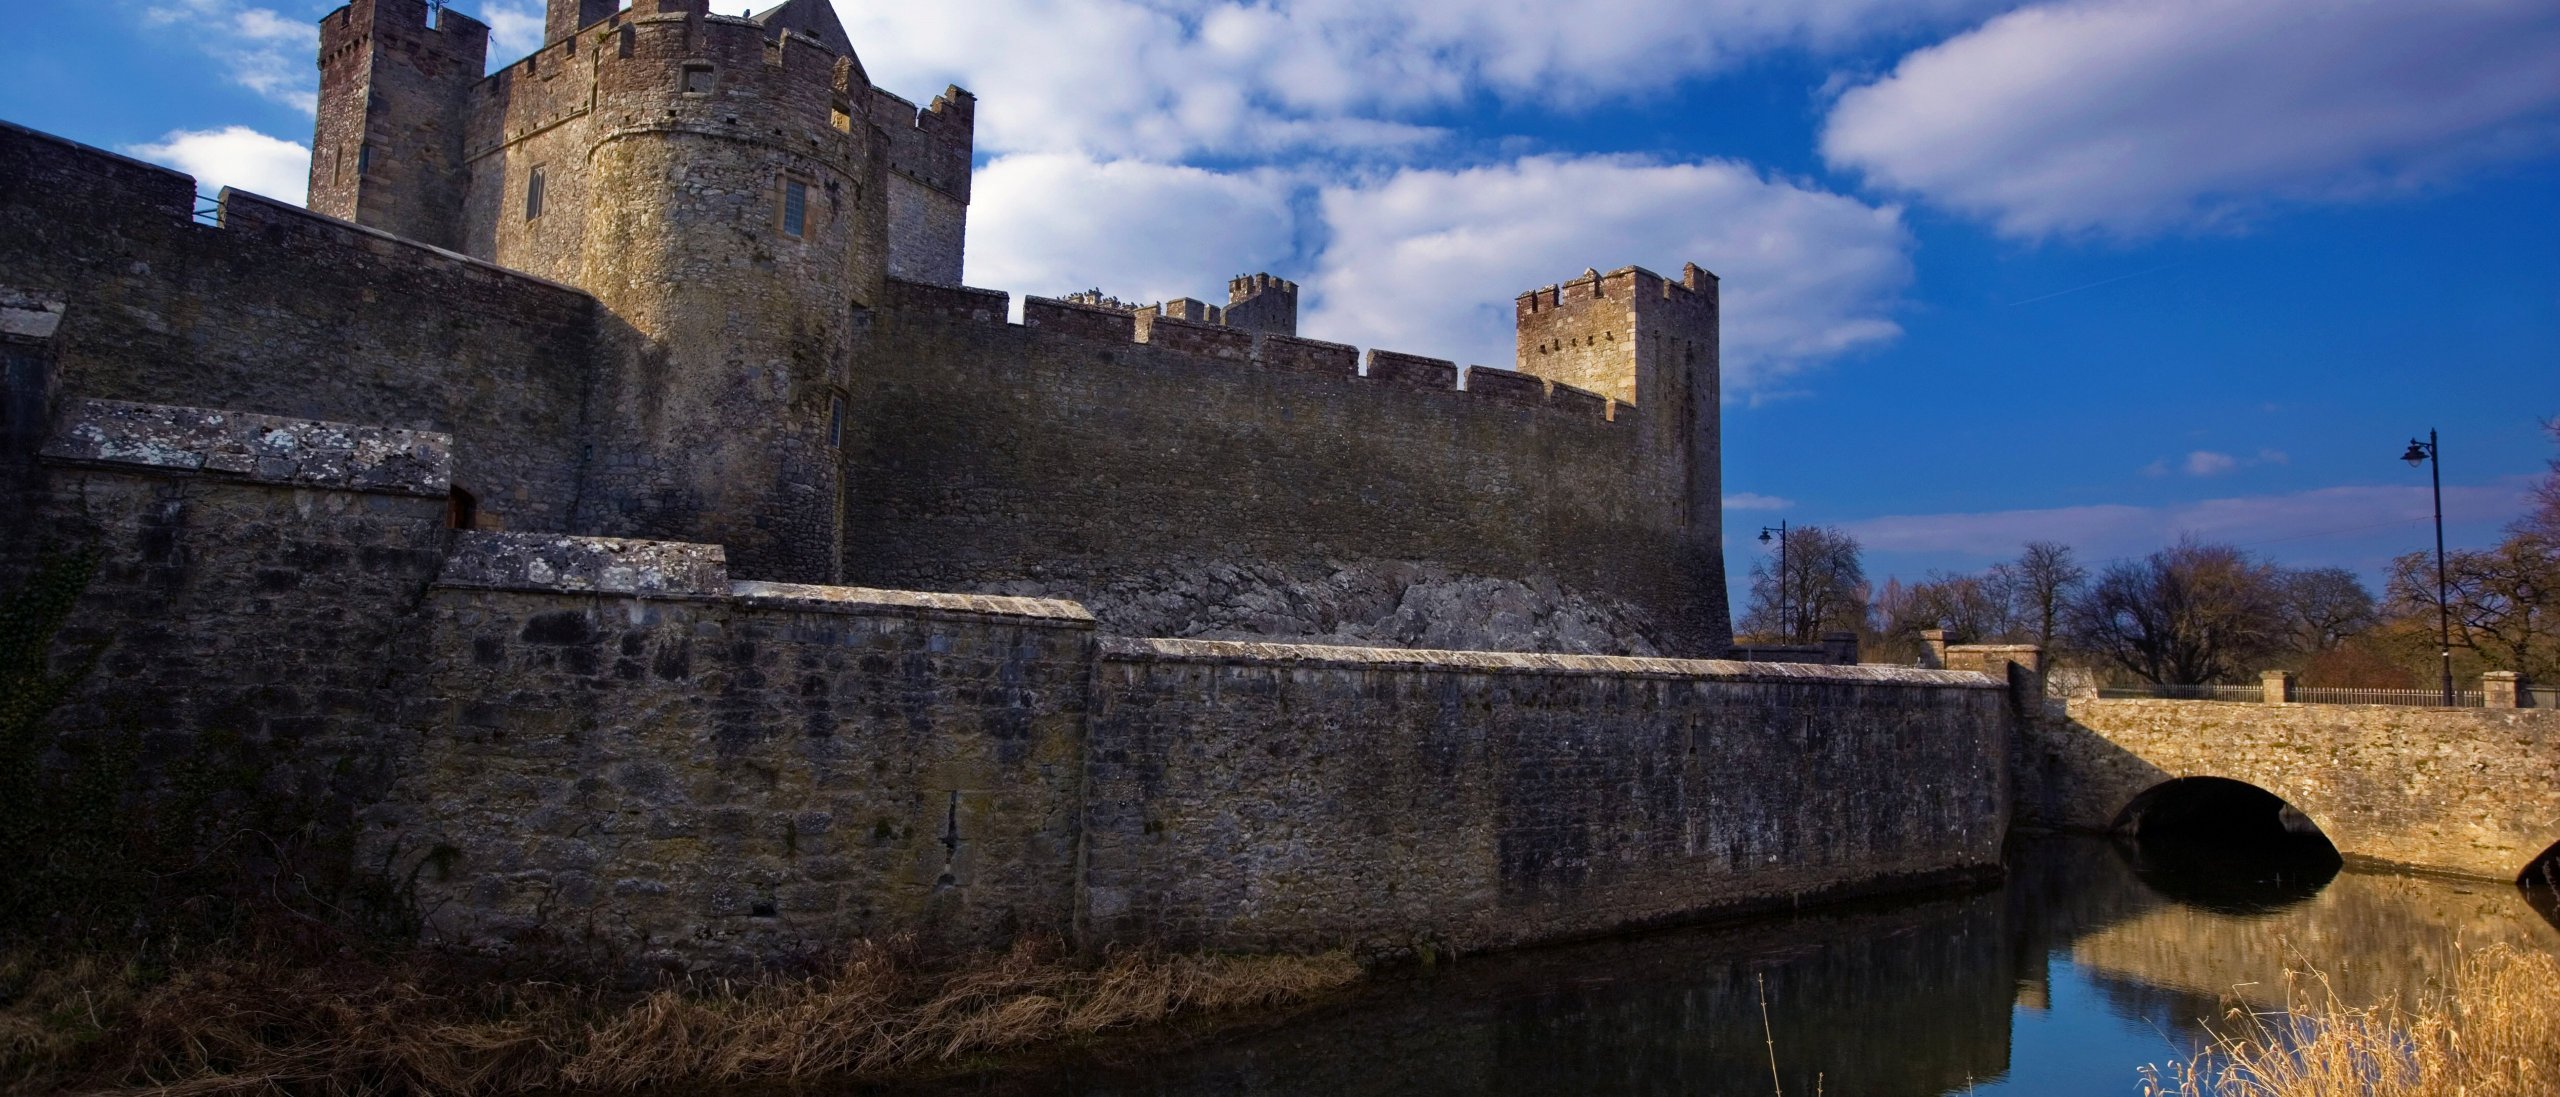 The exterior of Cahir Castle and the river Suir